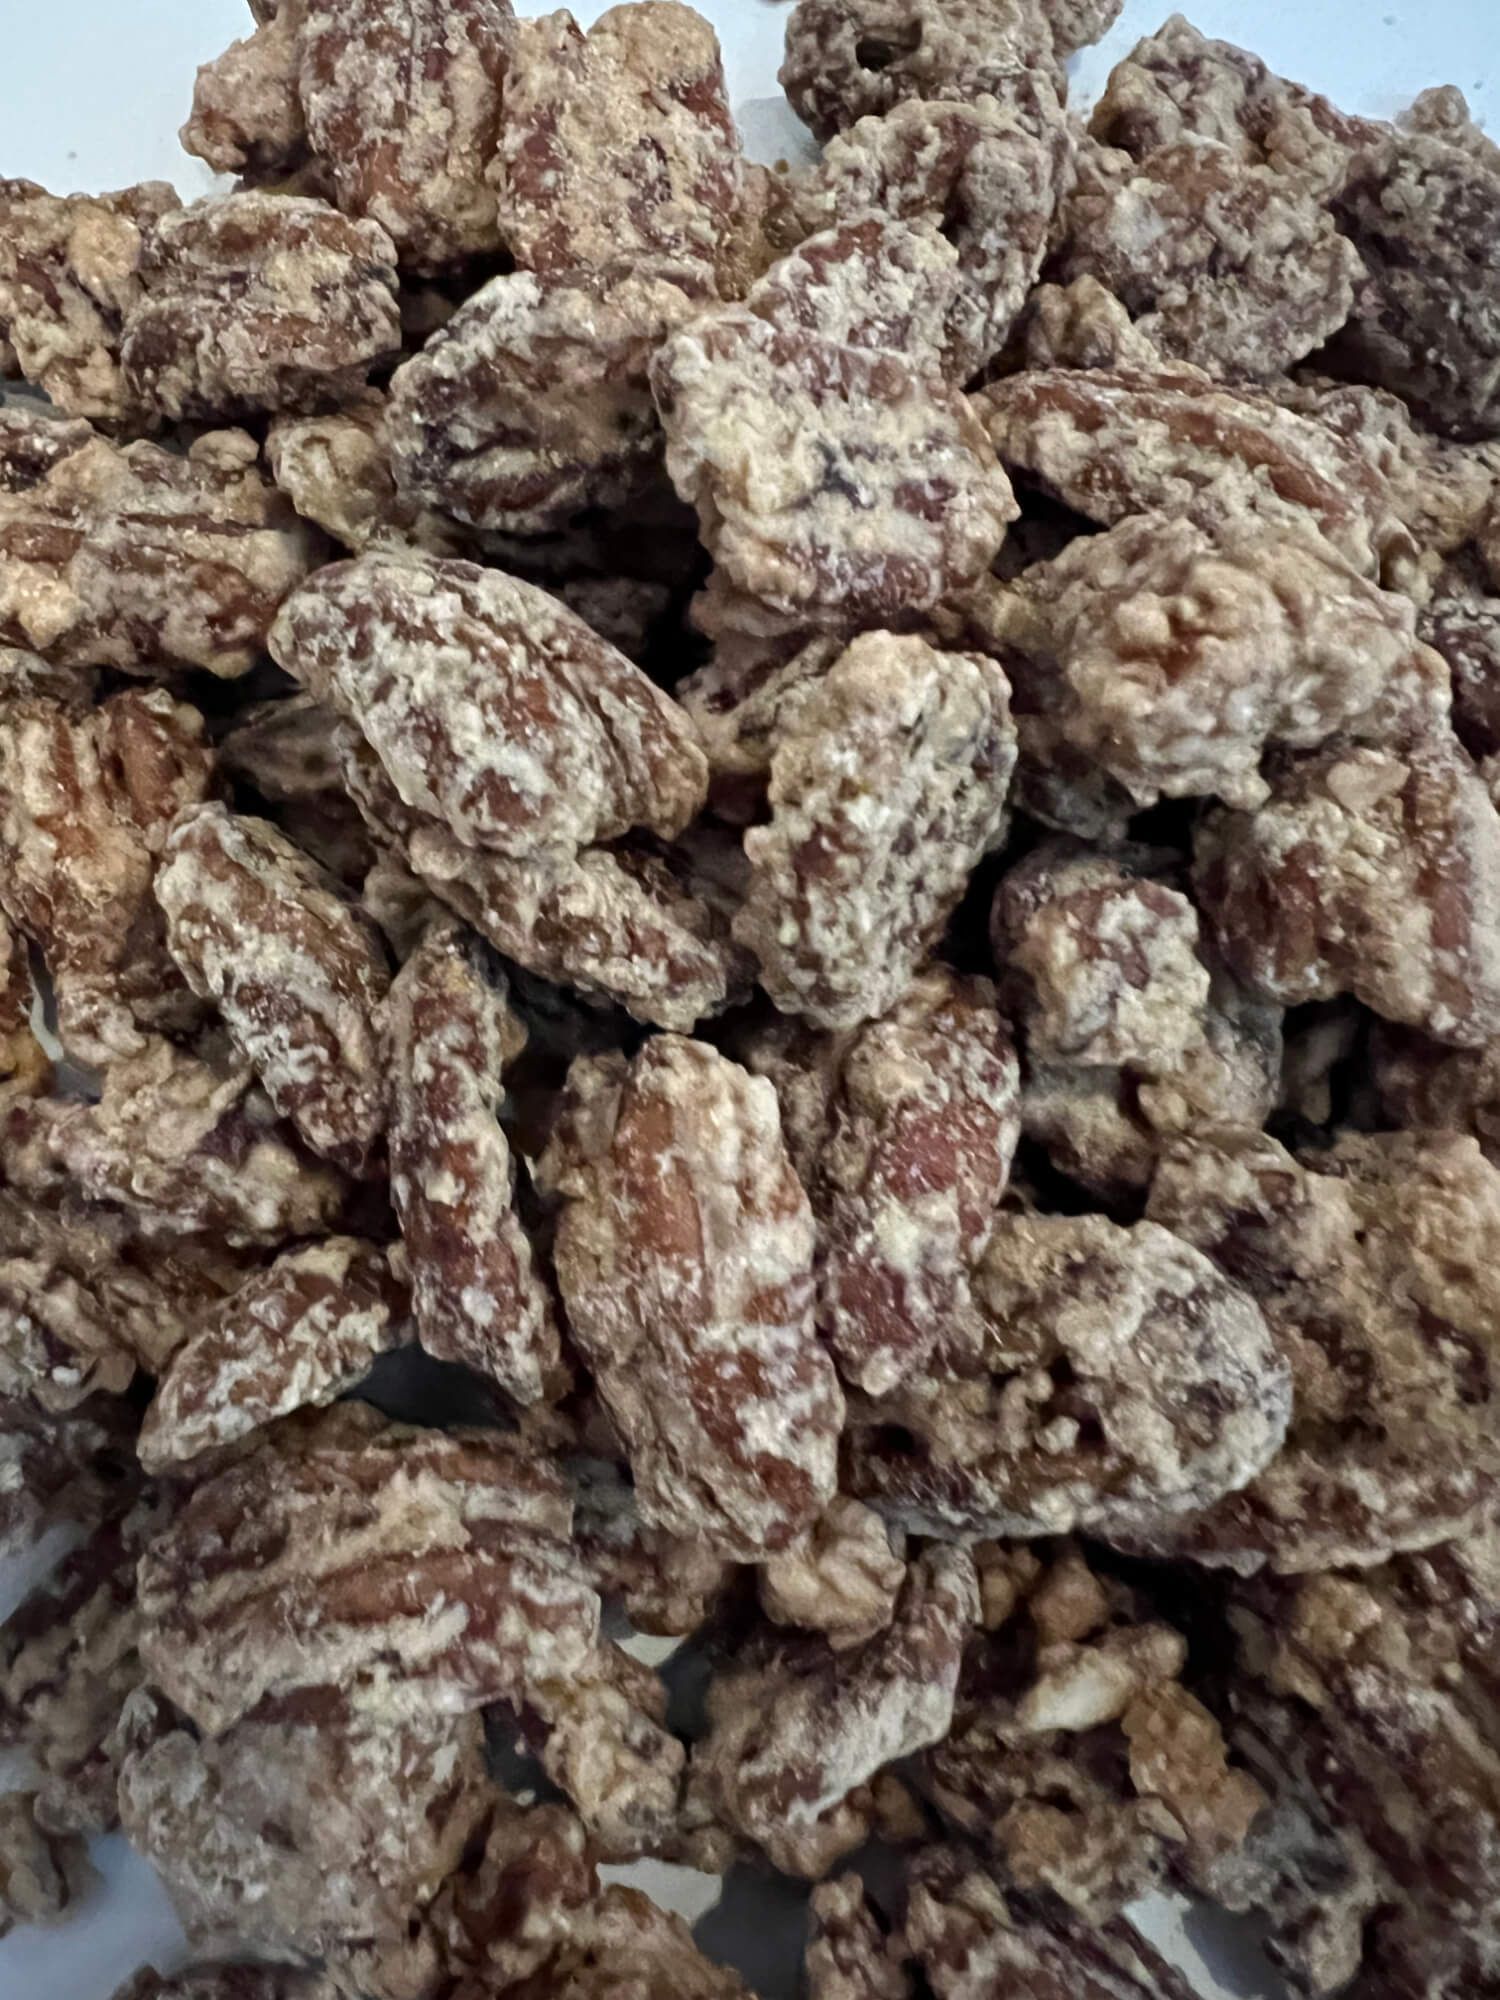 A pile of candied pecans on a white plate.